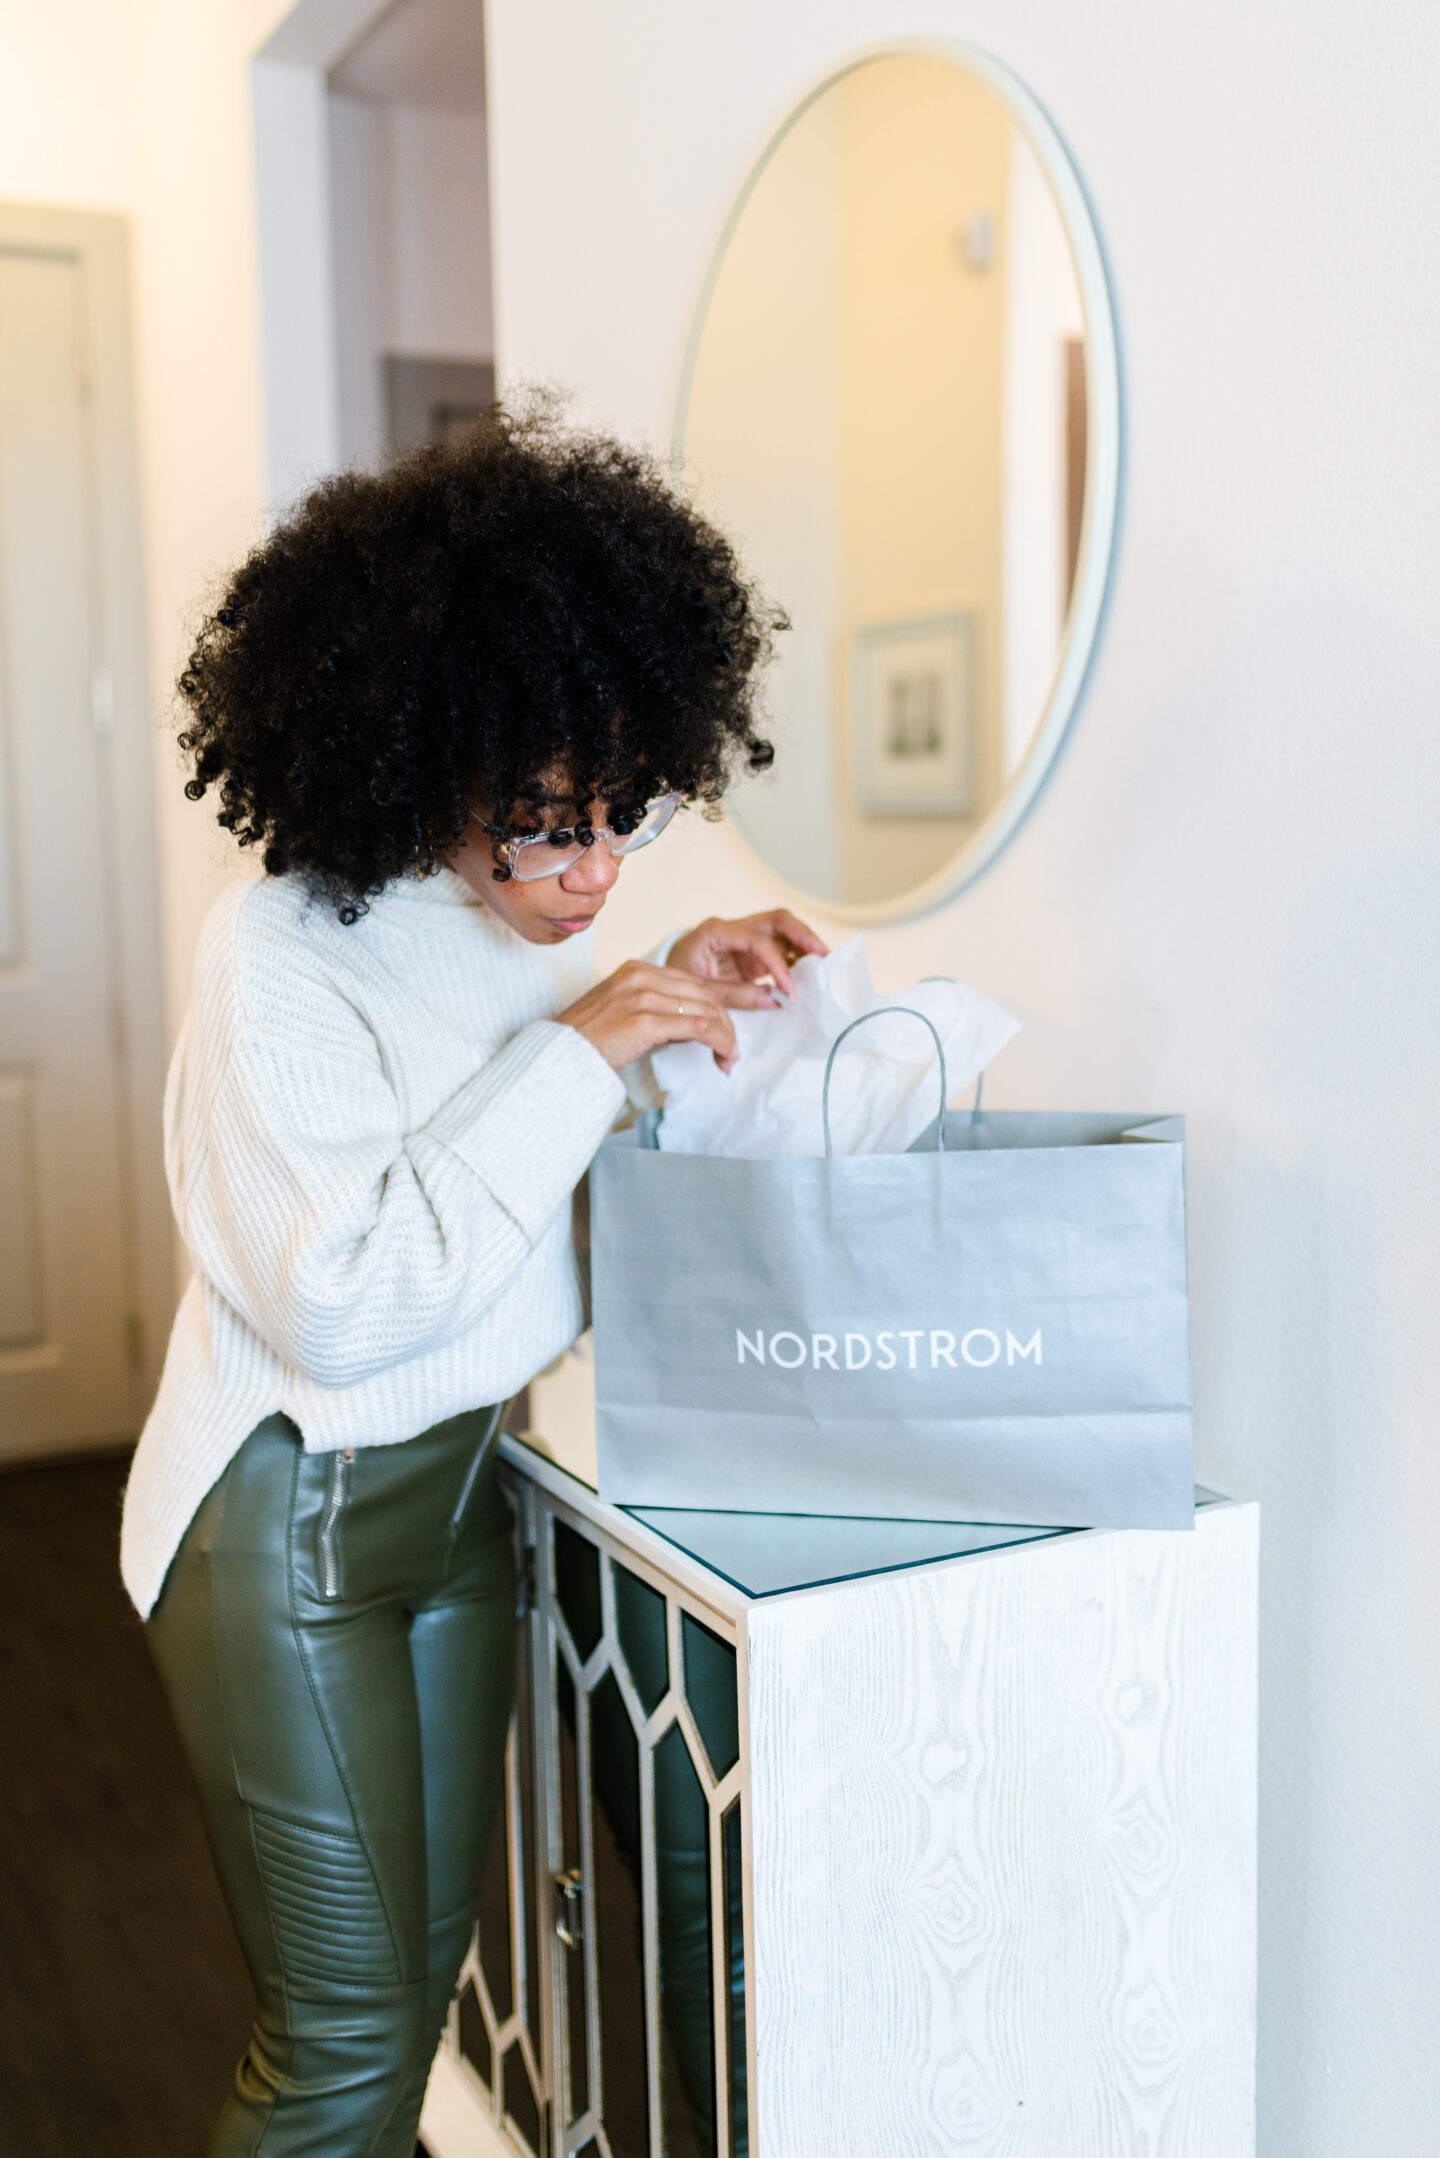 Shopping at Nordstrom for Under $100